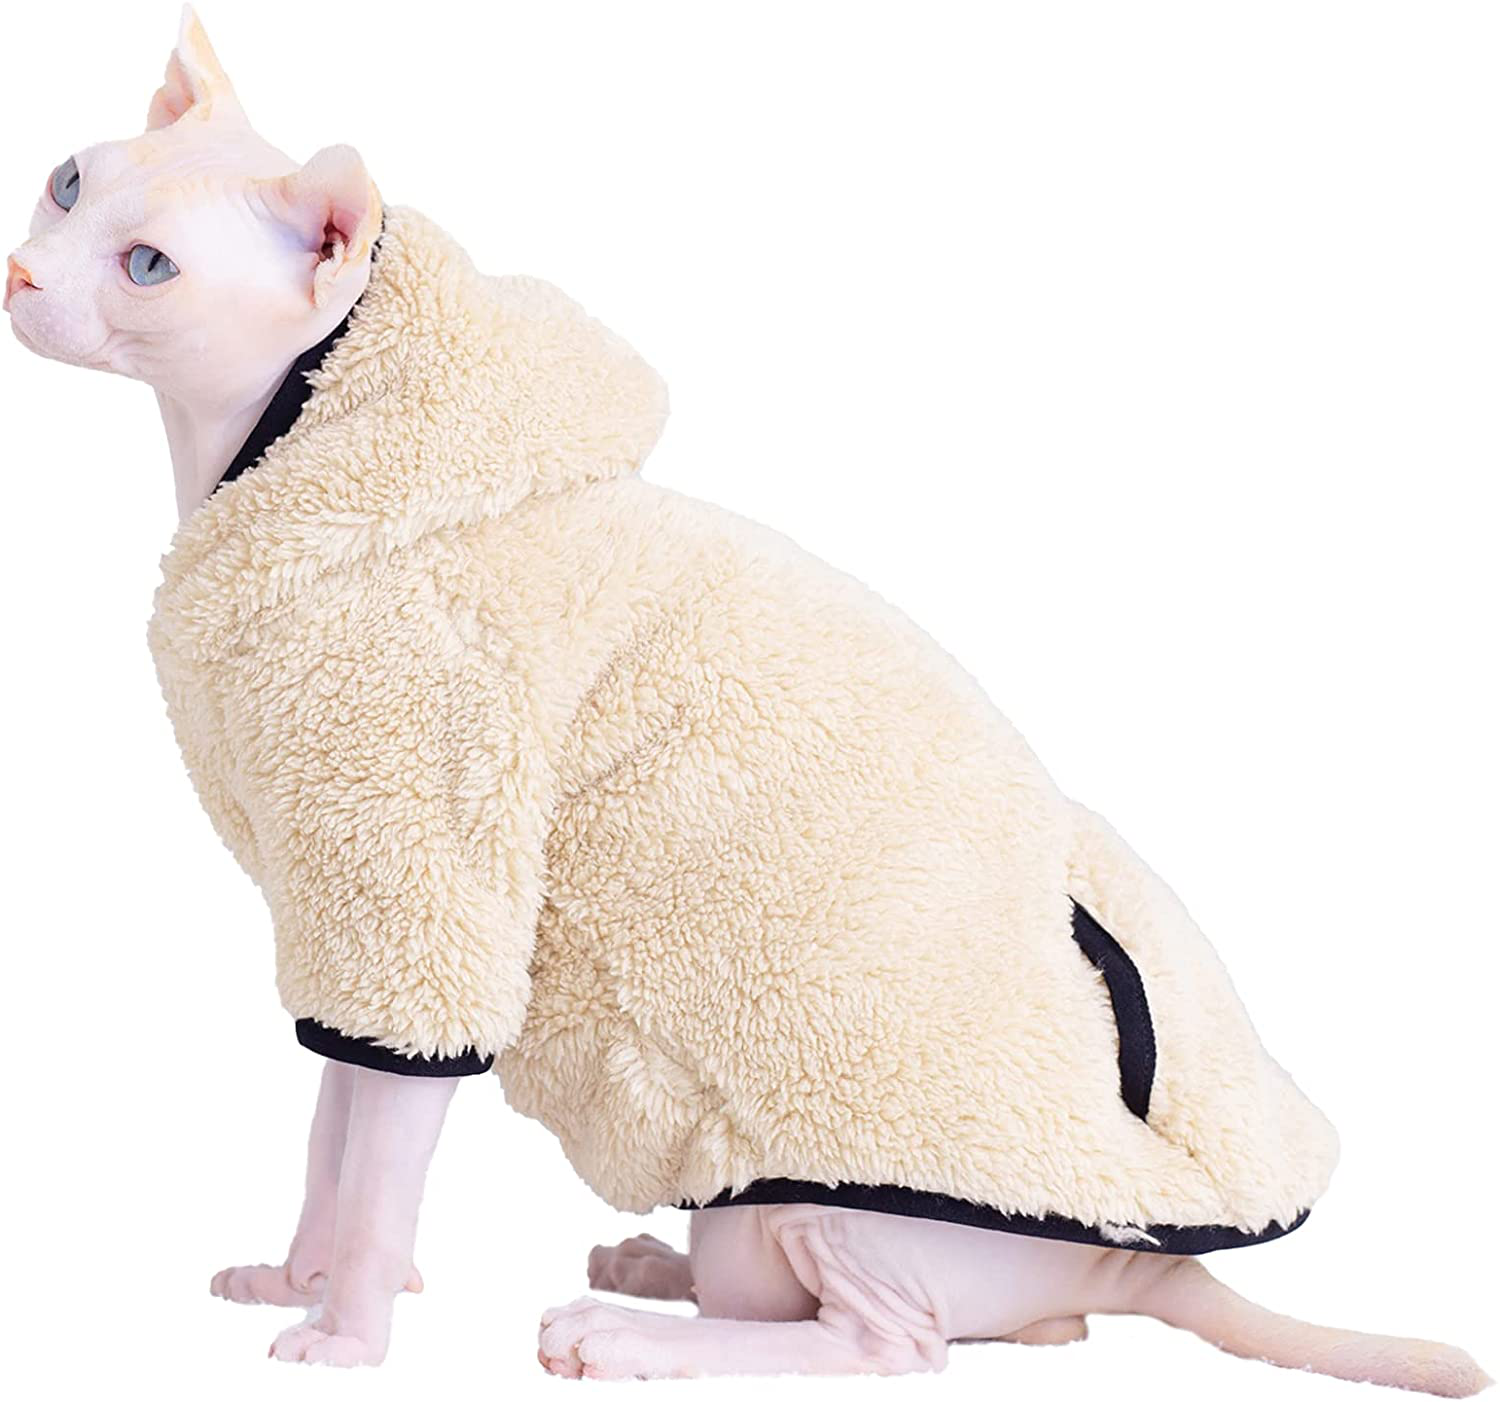 Sphynx Hairless Cat Clothes Winter Thick Warm Soft Vest Hoodies Pajamas for Cats Pet Clothes Pullover Kitten Shirts with Sleeves (Gray, M(4.4-5.5Lbs))